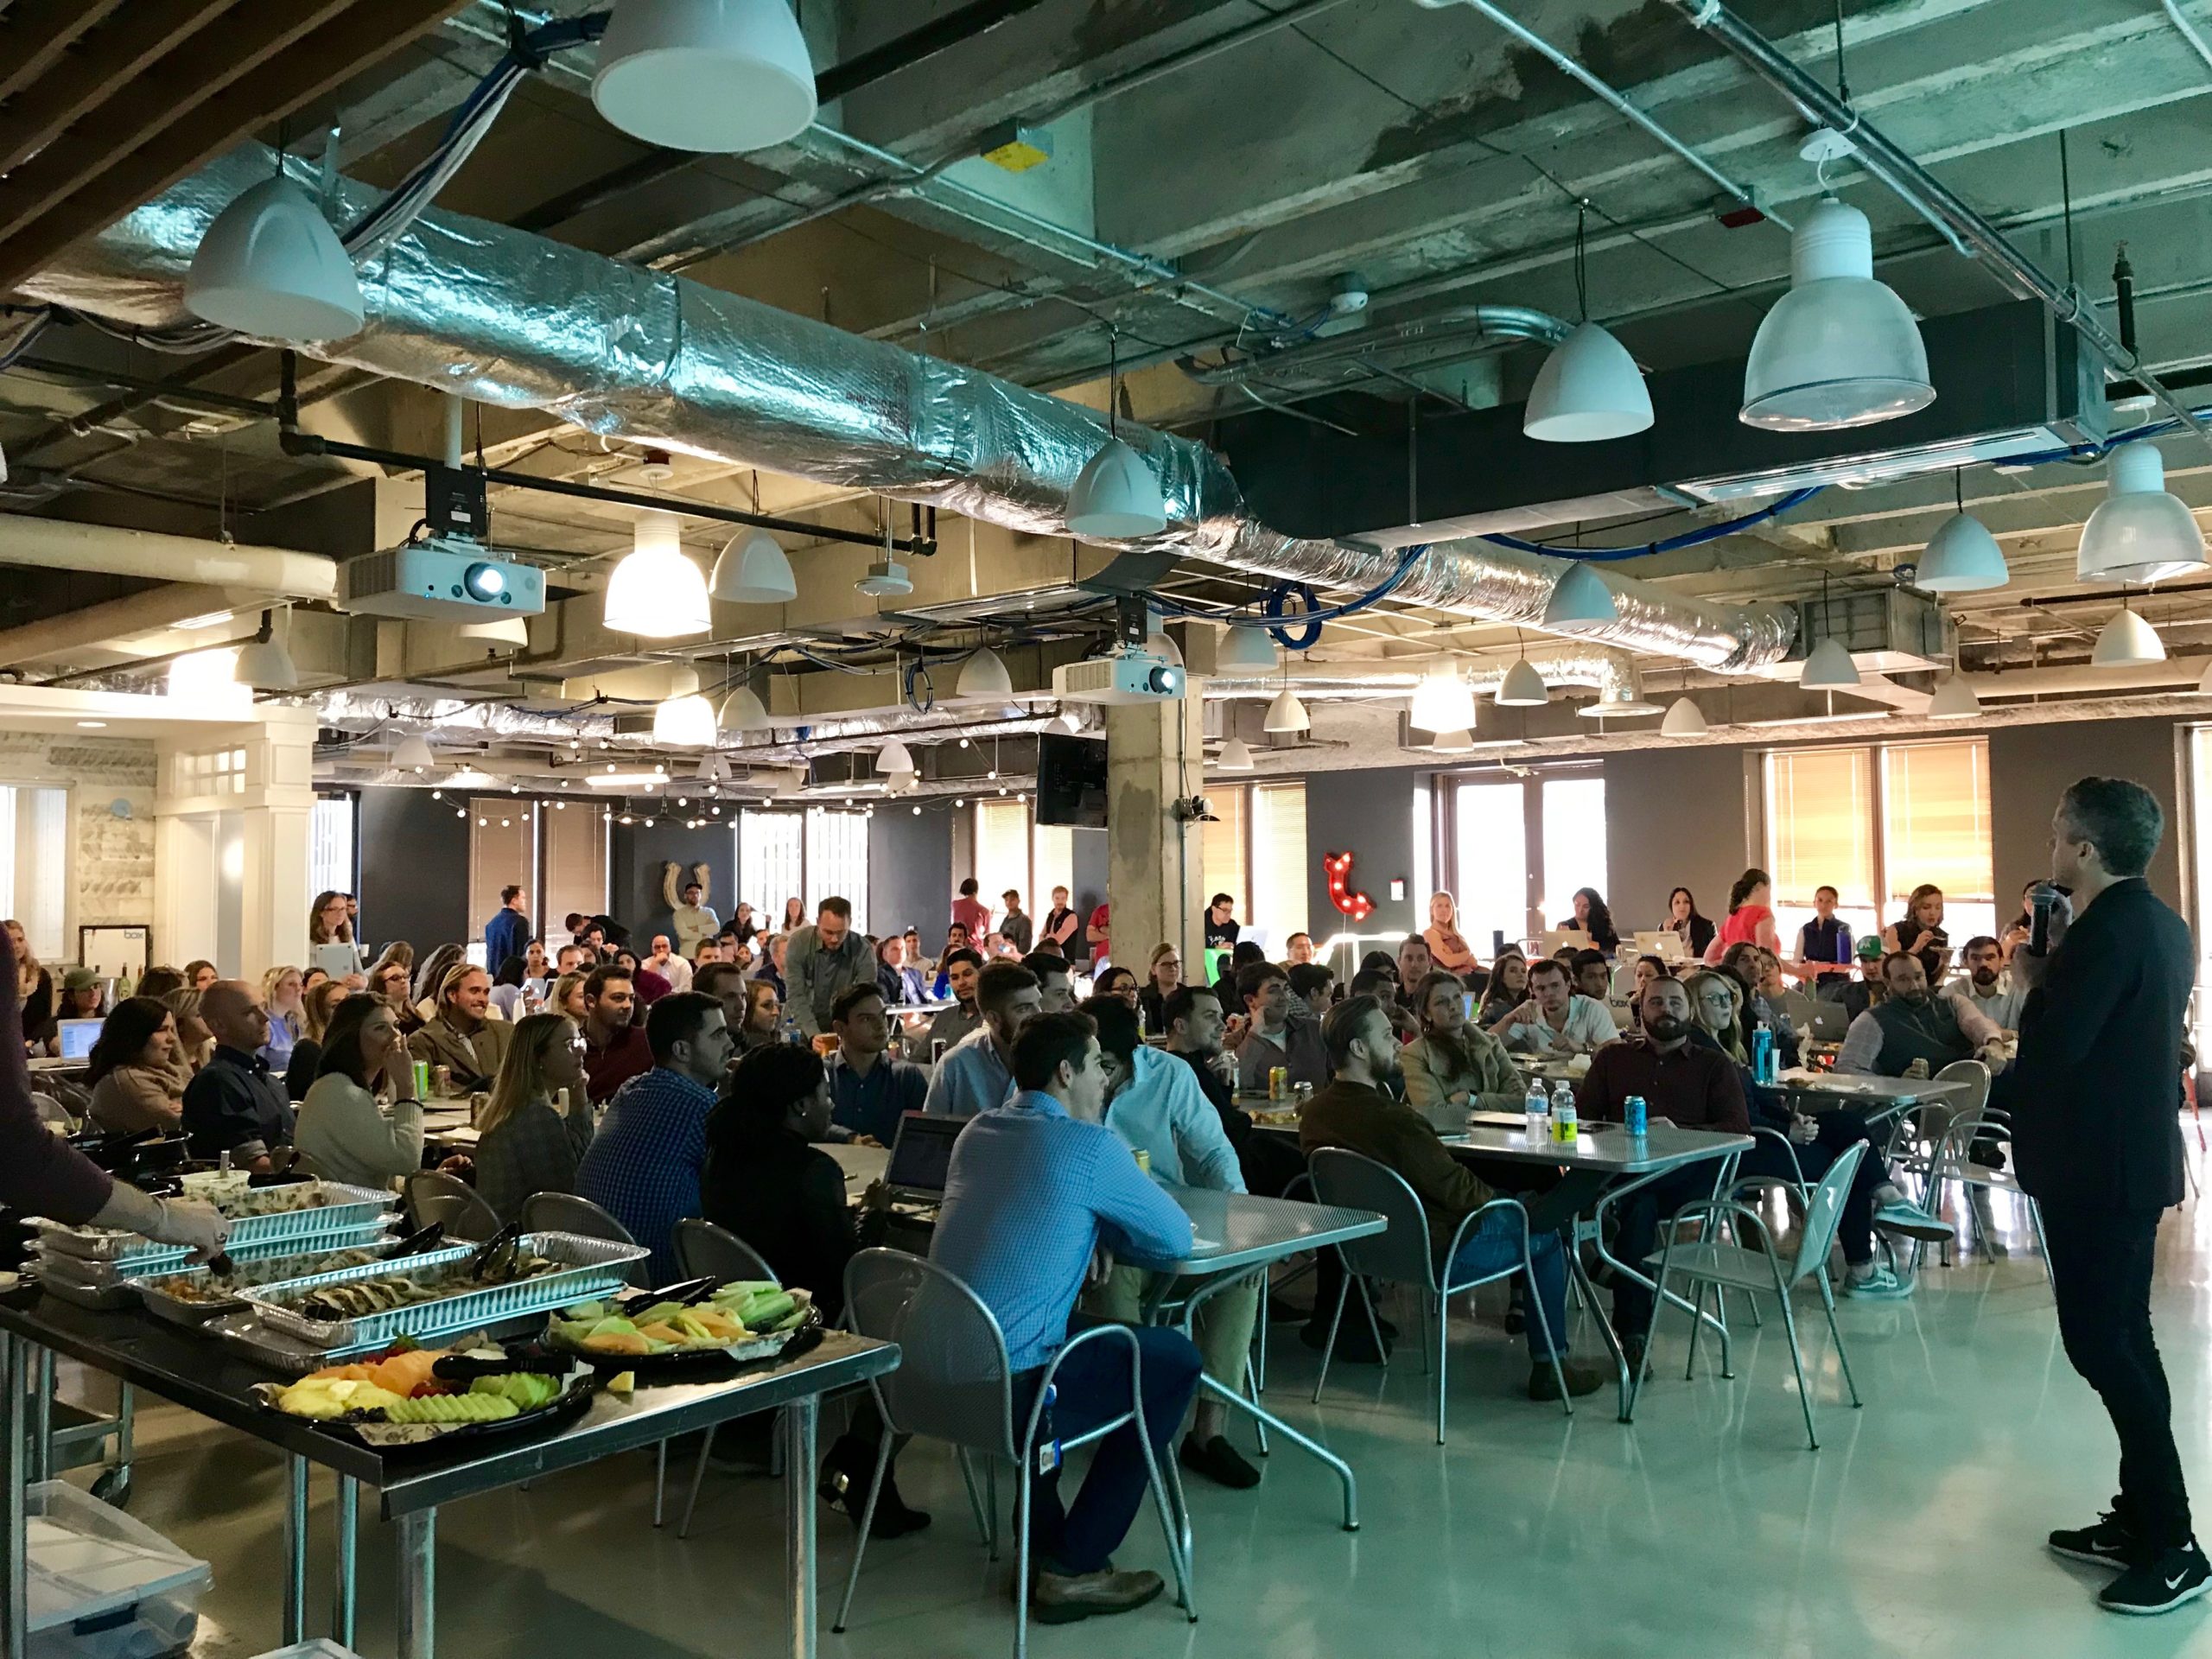 Inside of Box software company's dining hall full of employees sitting down to catered lunch and learn